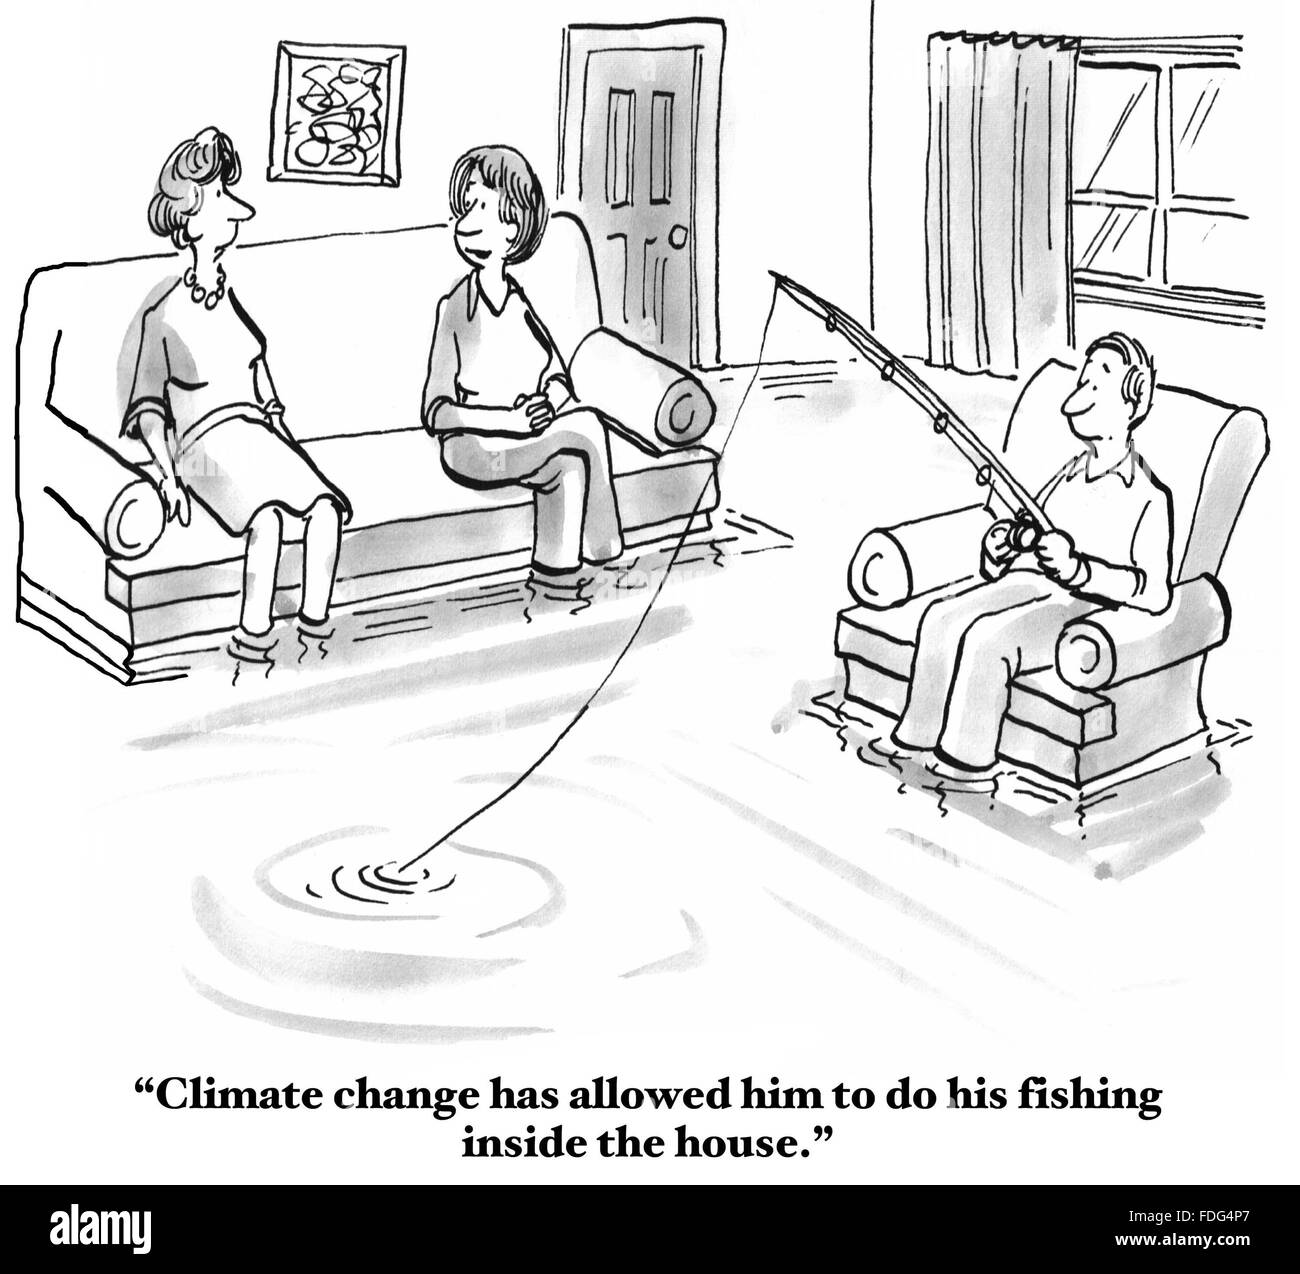 Climate change cartoon.  Climate change has caused  flooding so the husband can fish inside his living room now. Stock Photo